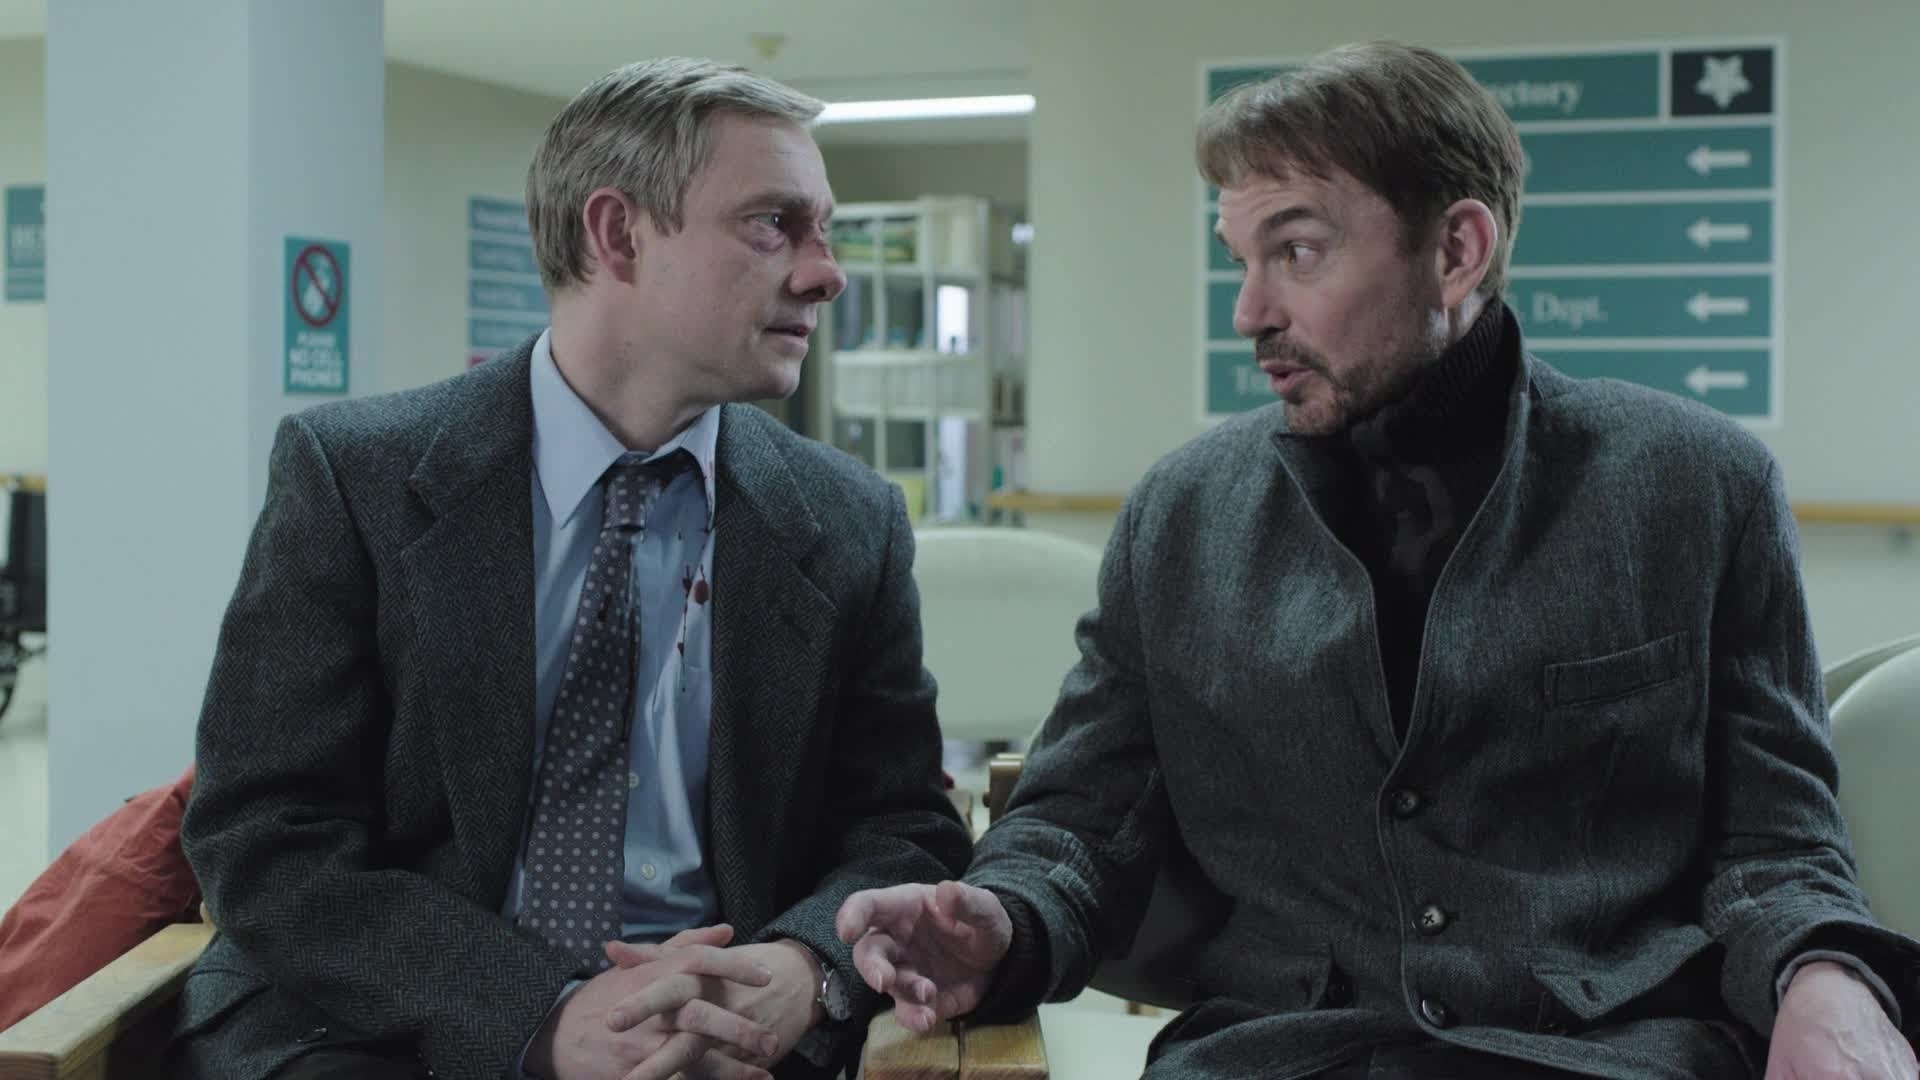 Martin Freeman as an injured Lester Nygaard talks with Lorne Malvo played by Billy Bob Thorton in a hospital in &quot;Fargo&quot;